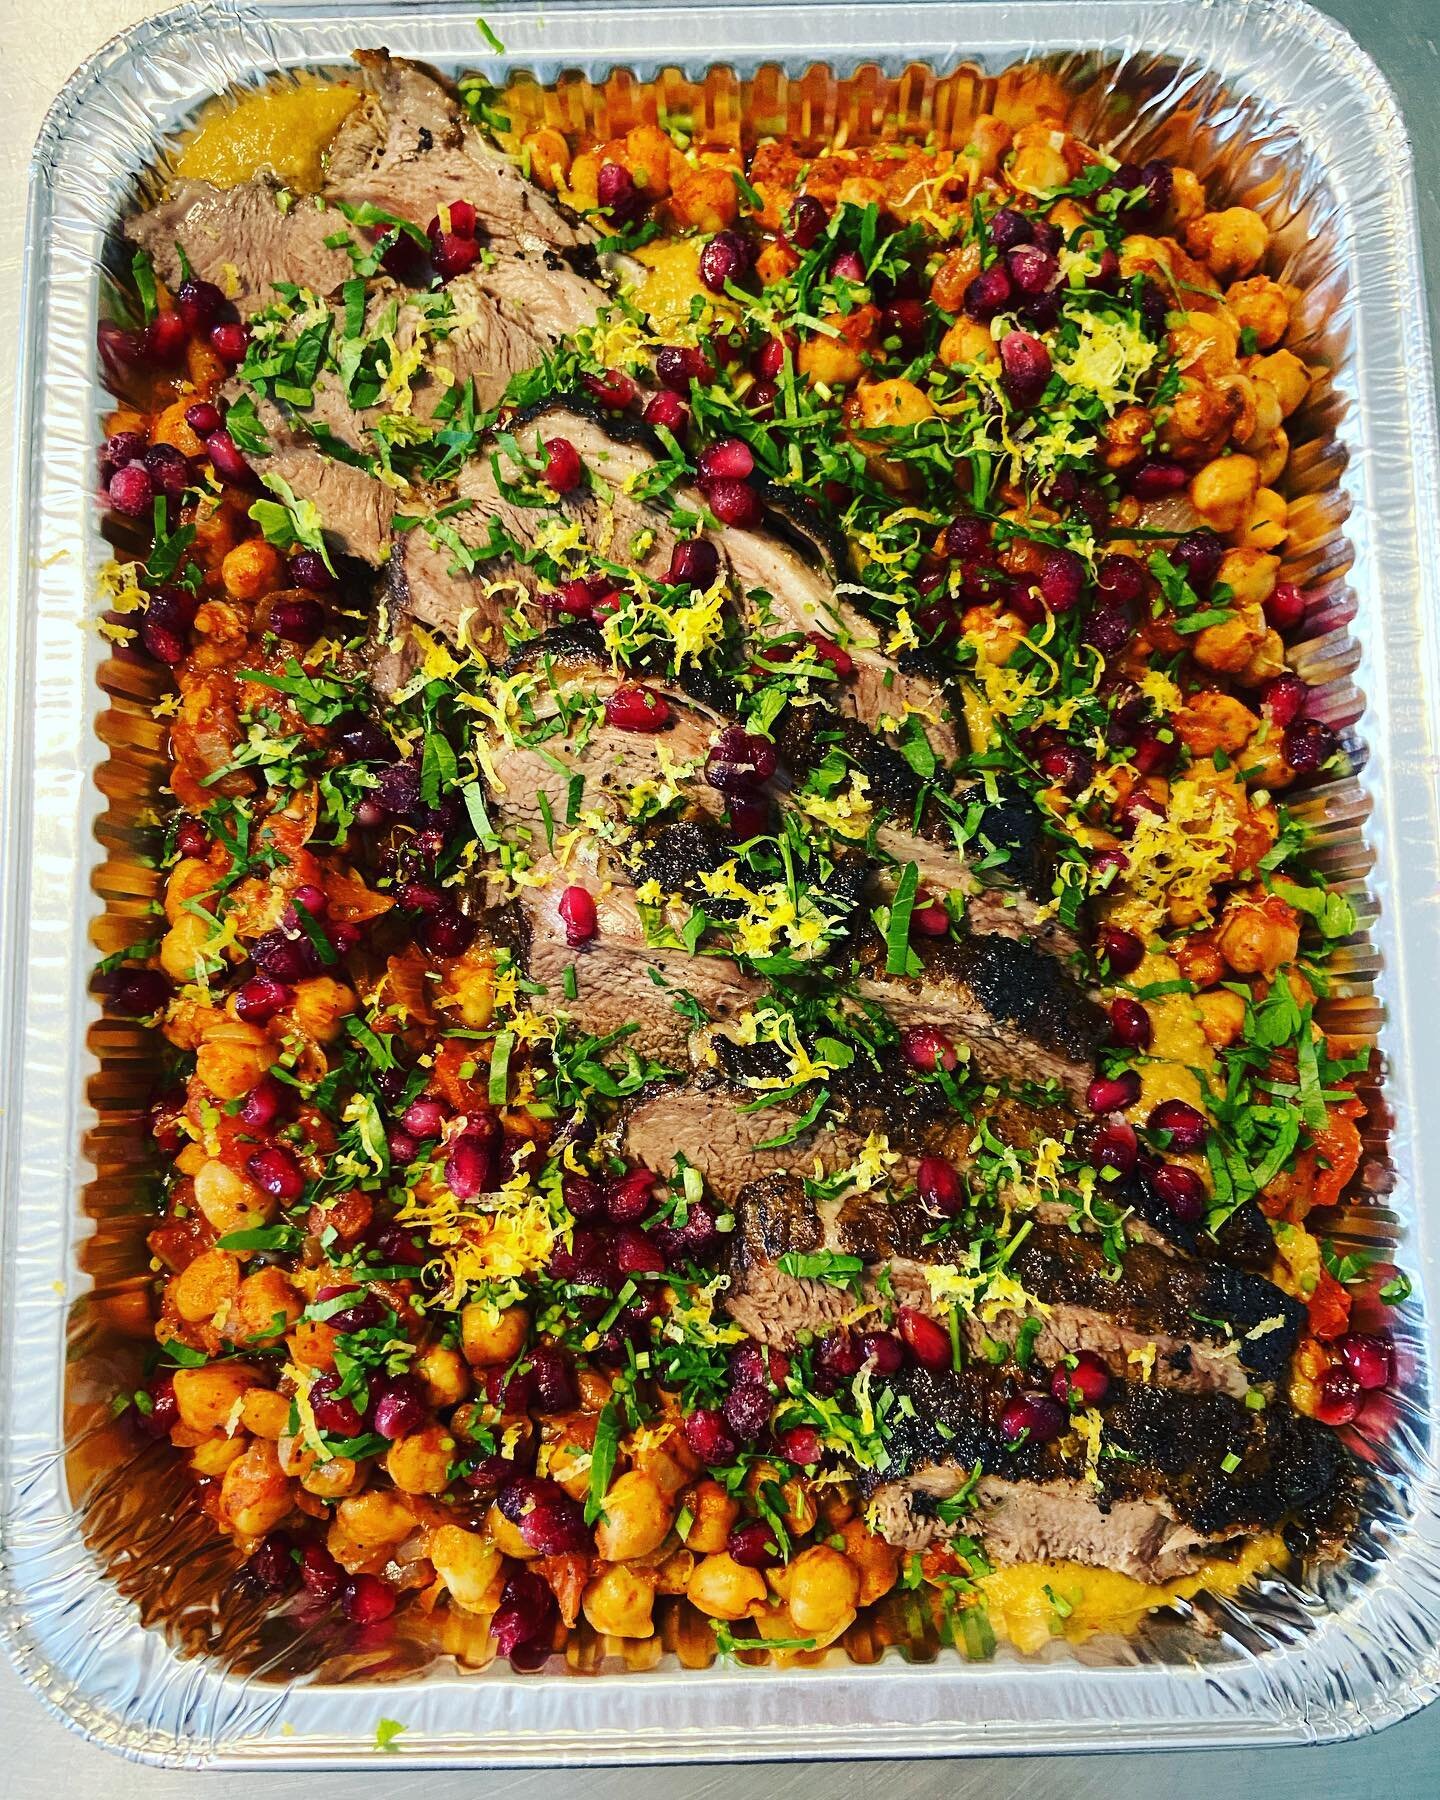 Braised lamb! Based on the dish that #beatbobbyflay 

#ctcatering #cteats #supportsmallbusiness